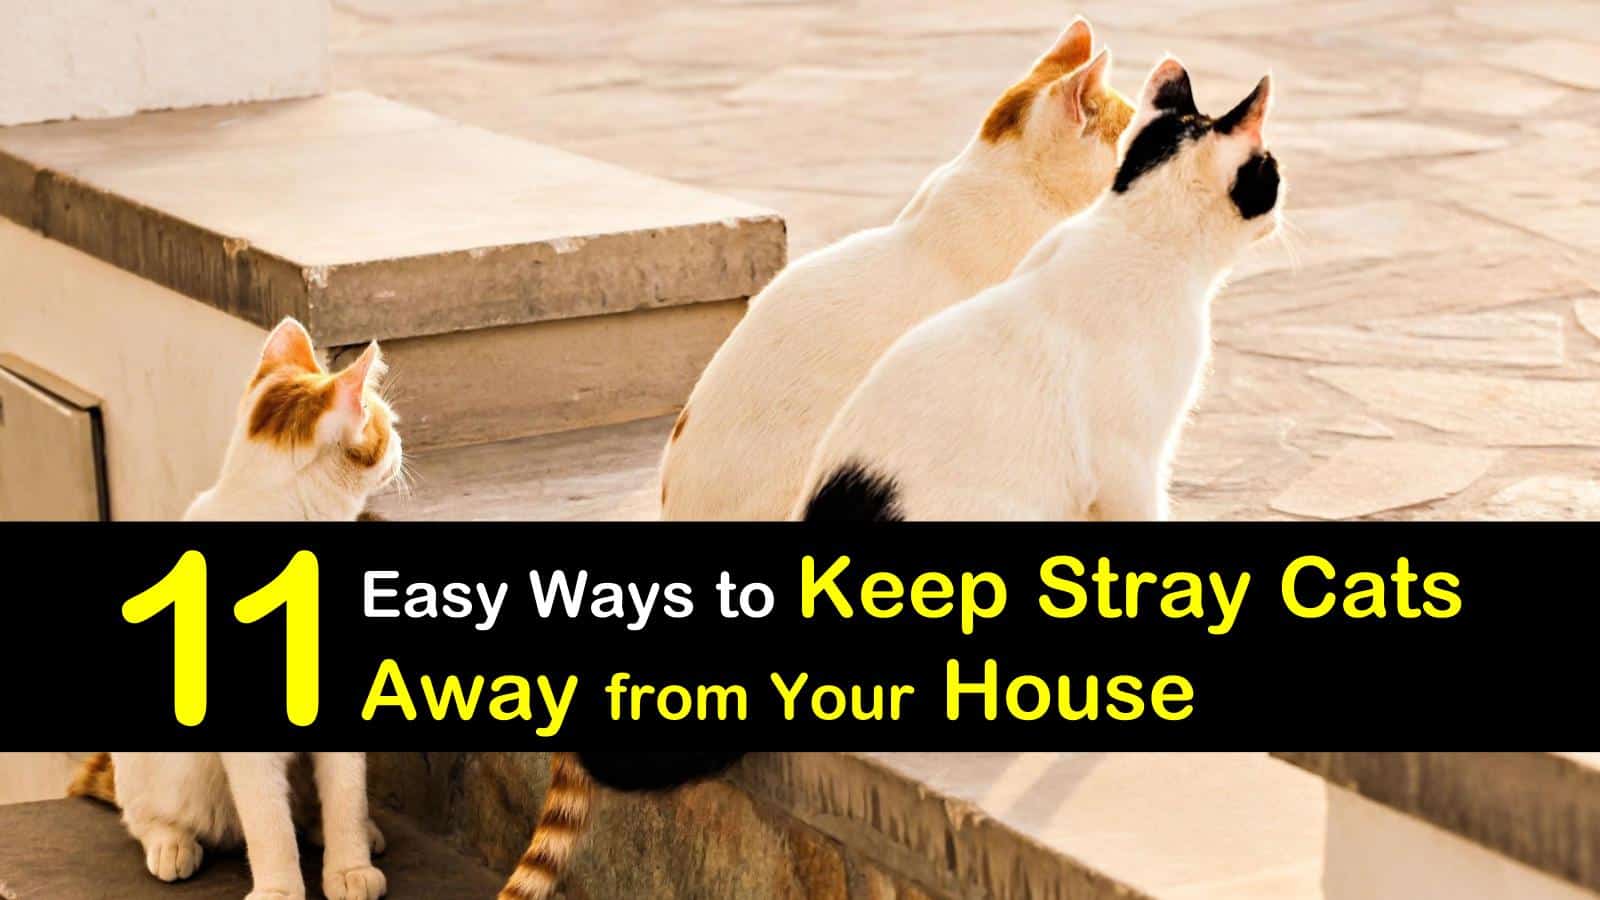 who to call to pick up stray cats